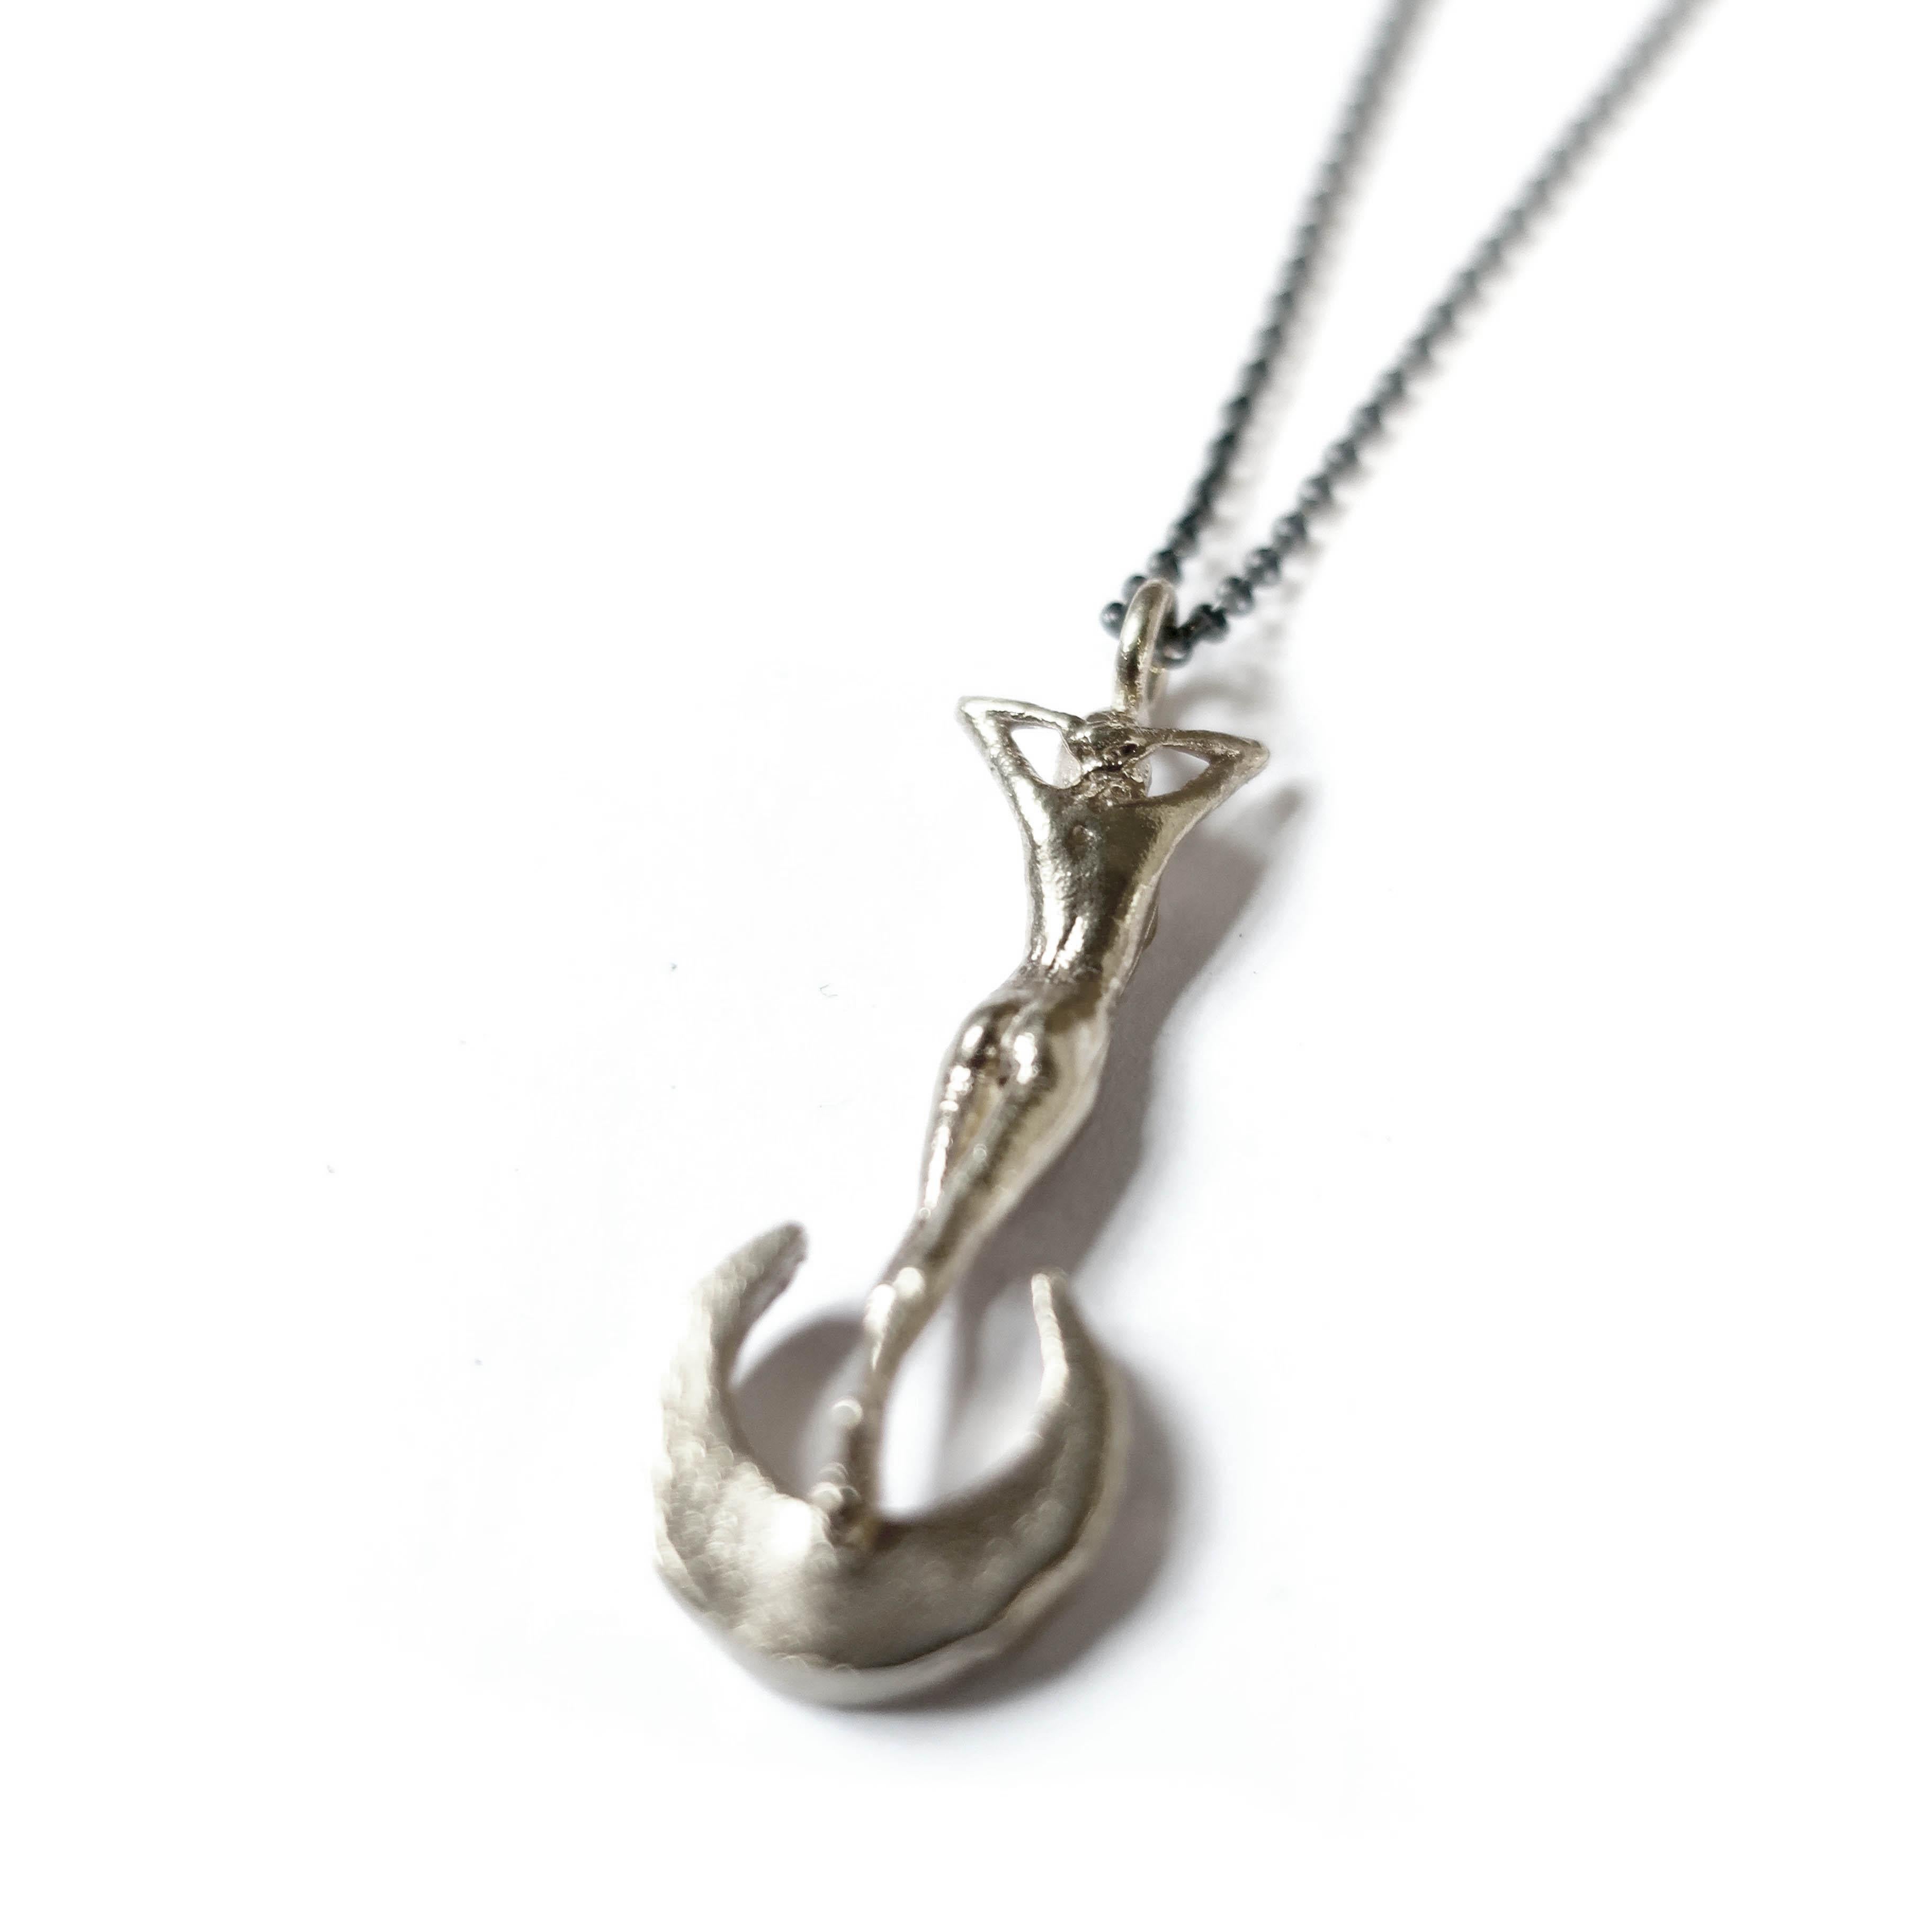 Cast in solid 14k white gold this statuesque woman perched atop a crescent moon is a stunning ode to classic art nouveau themes in jewelry. Strung on a solid 20 inch twisted rope chain this pendant measures 33mm in height.  The moon is bead set with